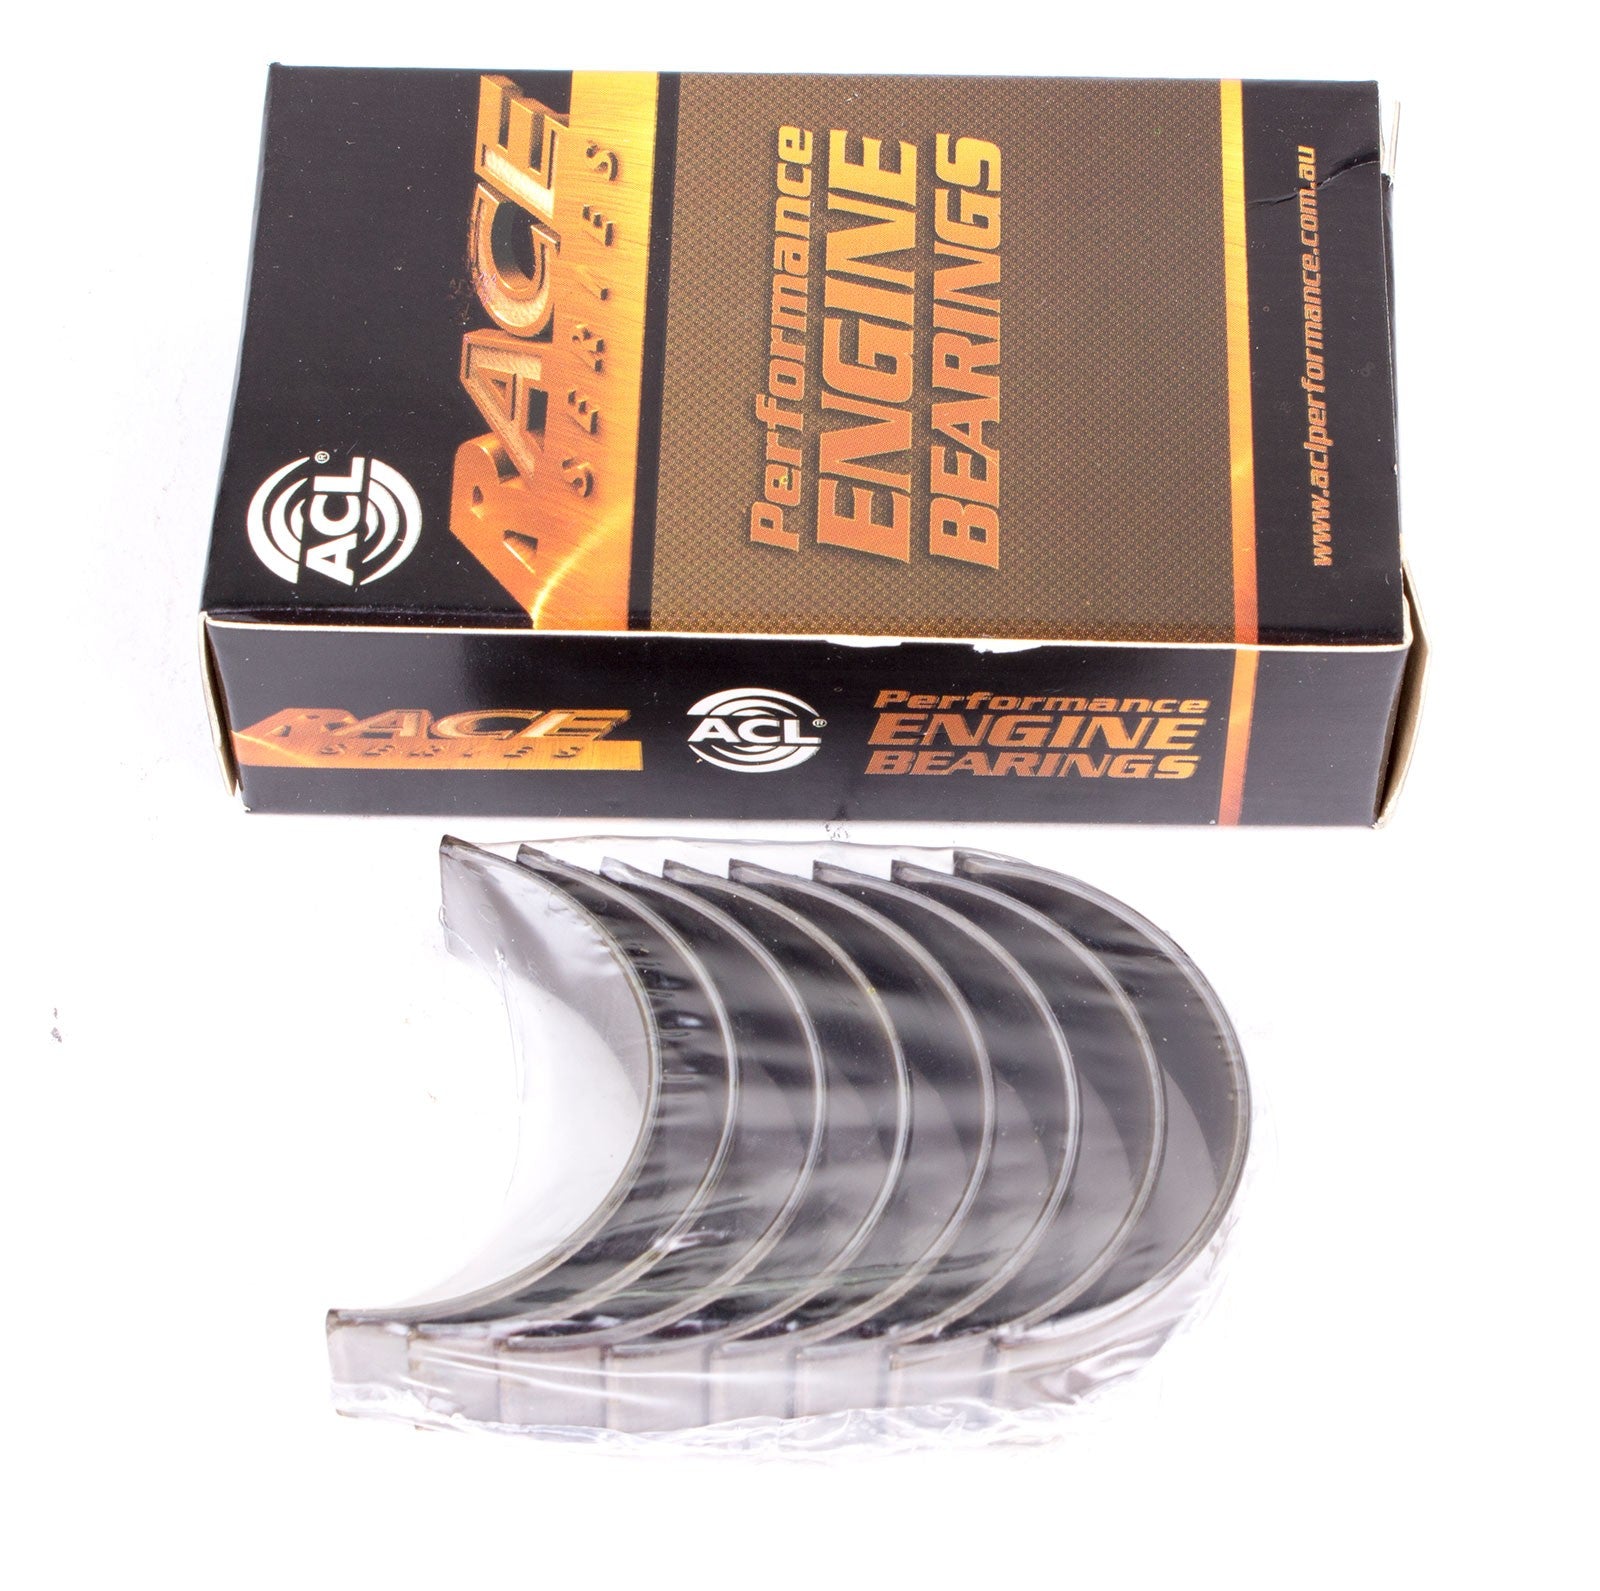 ACL 5M1743H-01 Main bearing set (ACL Race Series) Photo-0 